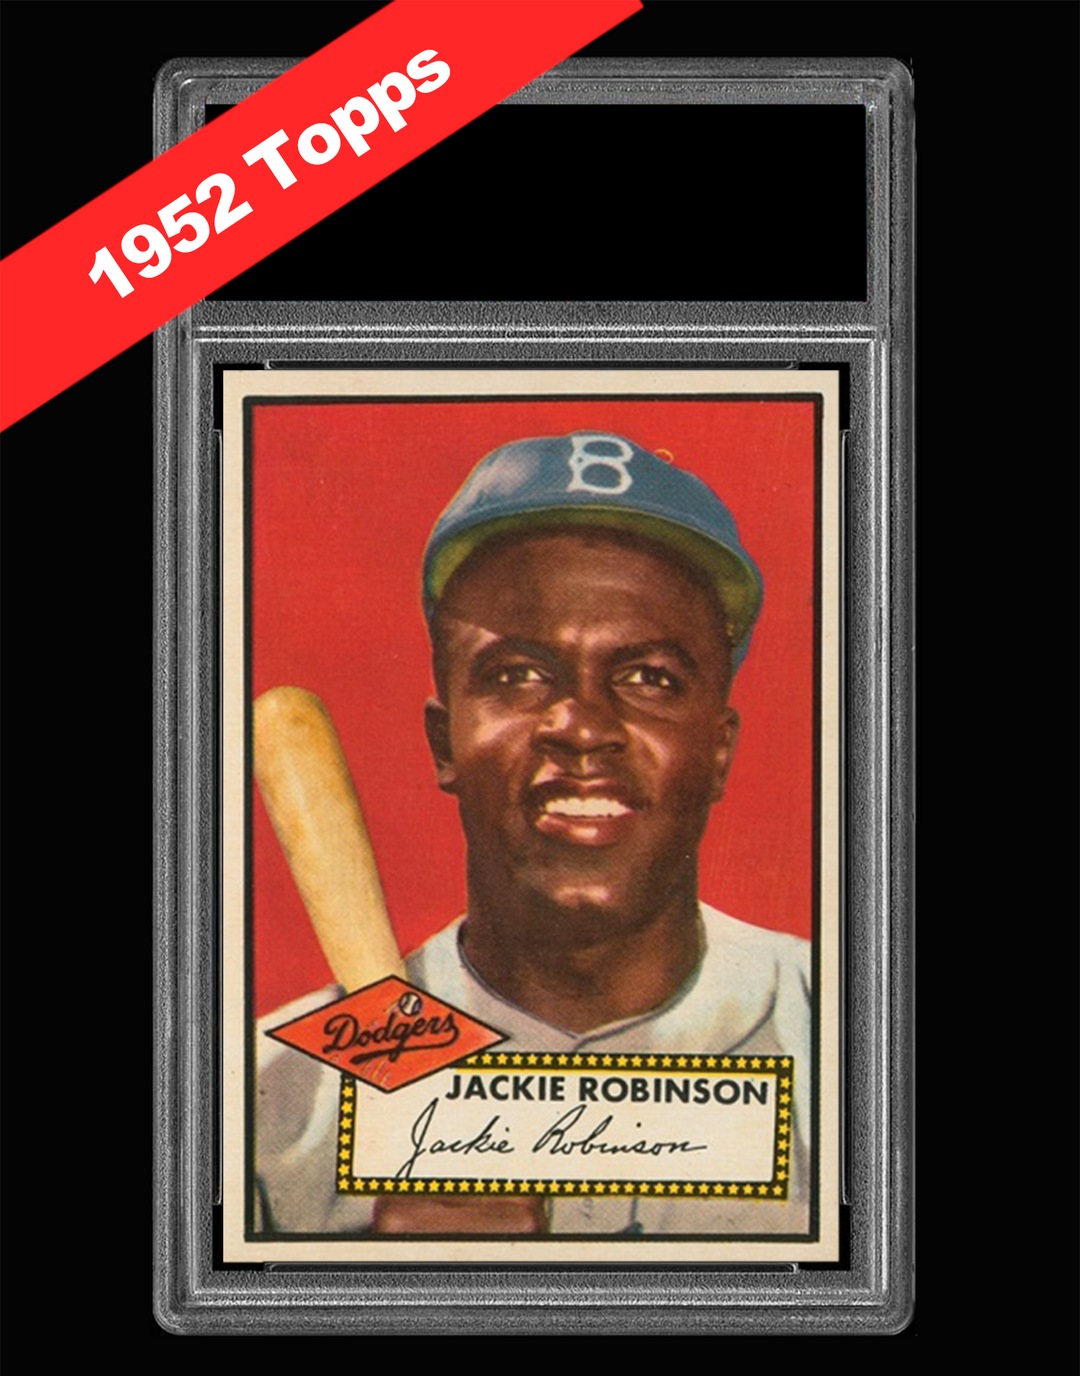 1952 Topps PSA Style Empty Card Slab for Sports Cards (66.675 x 95.25mm) - Caseforceco